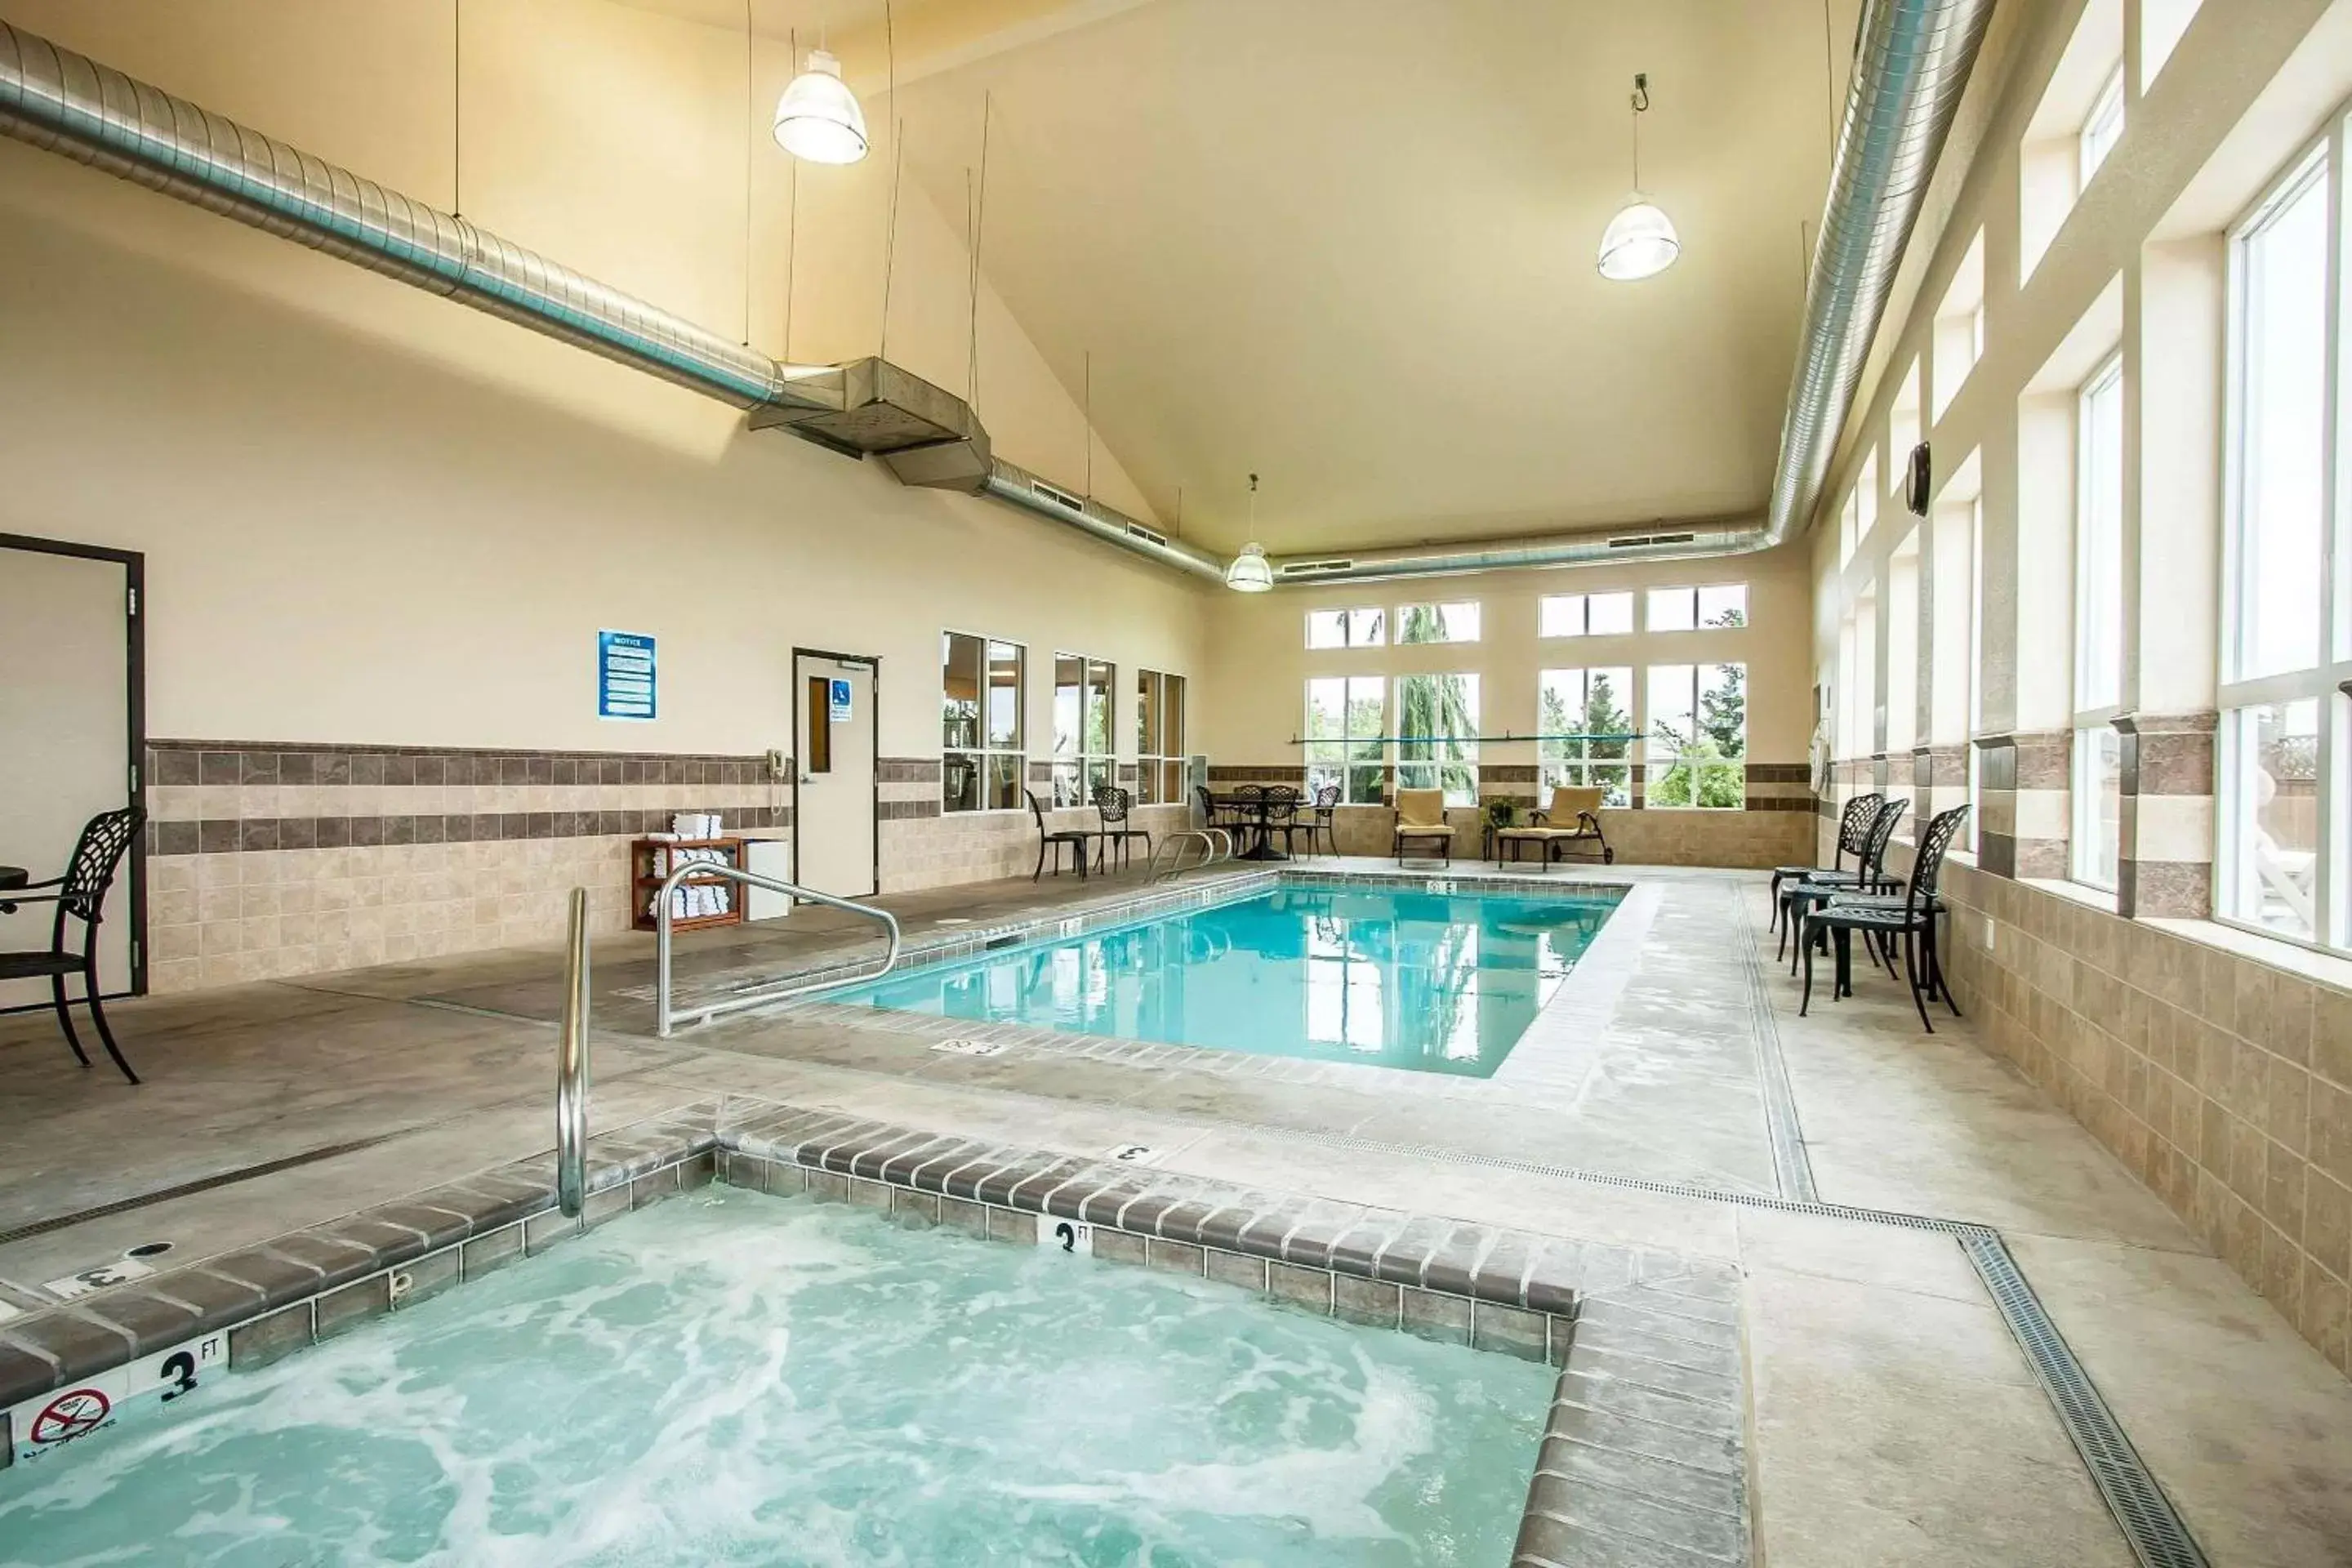 On site, Swimming Pool in Comfort Inn & Suites McMinnville Wine Country